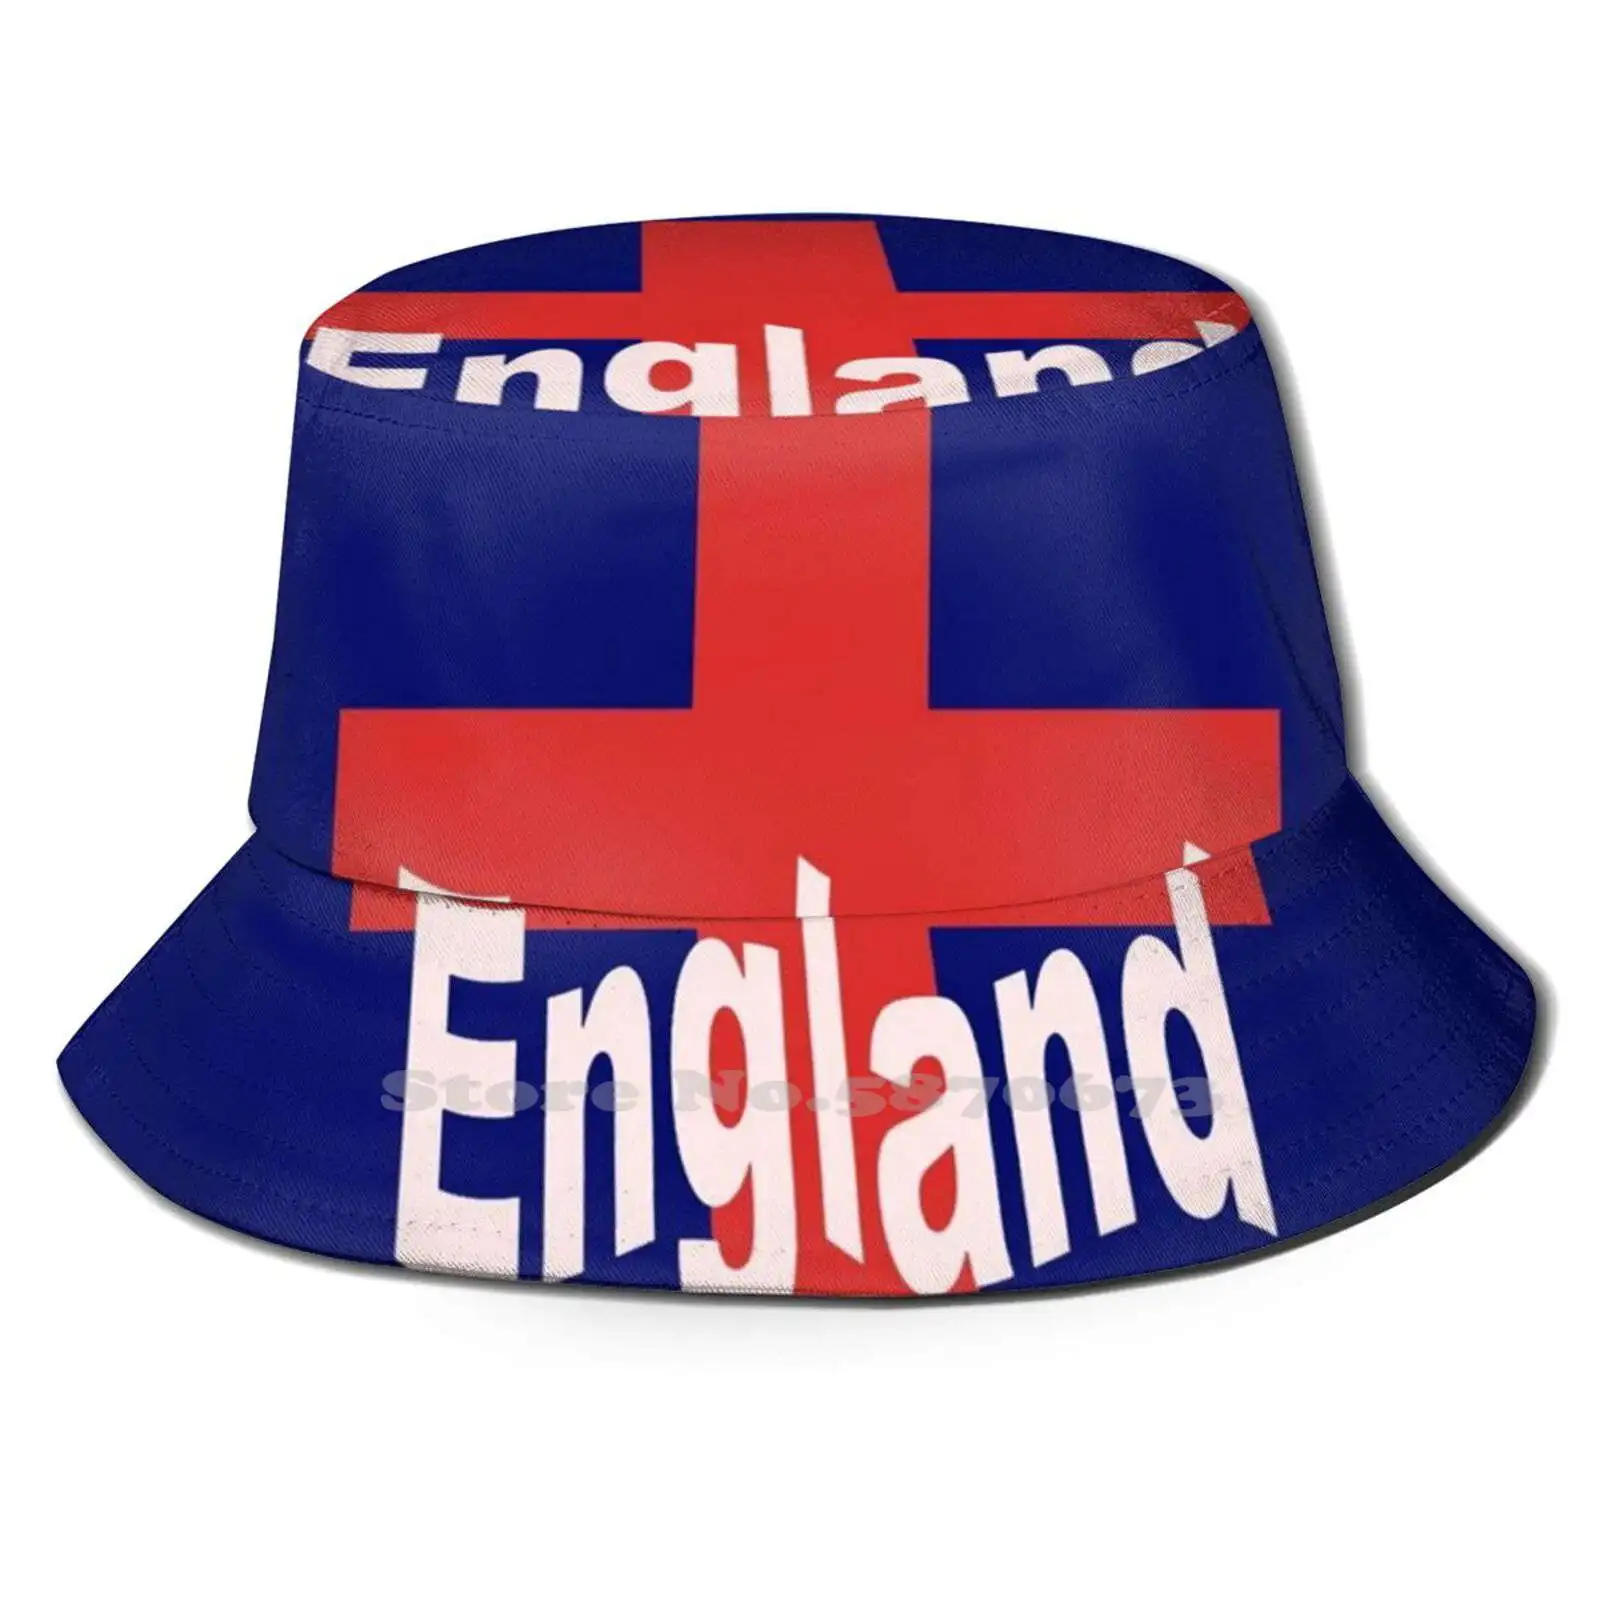 England St George Cross Boater Hat 